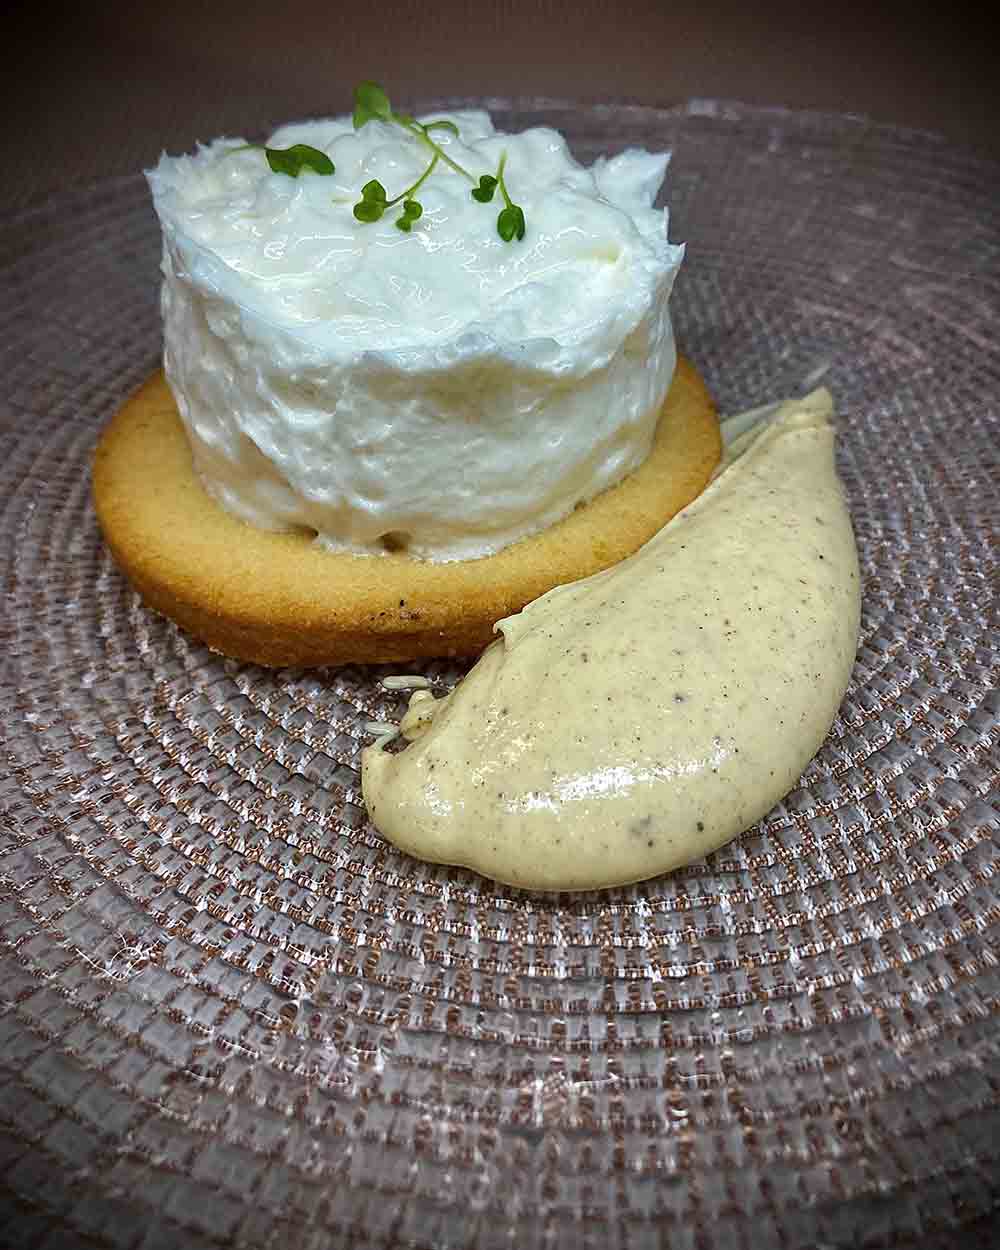 Rice pudding foam on almond biscuit and cinnamon cream